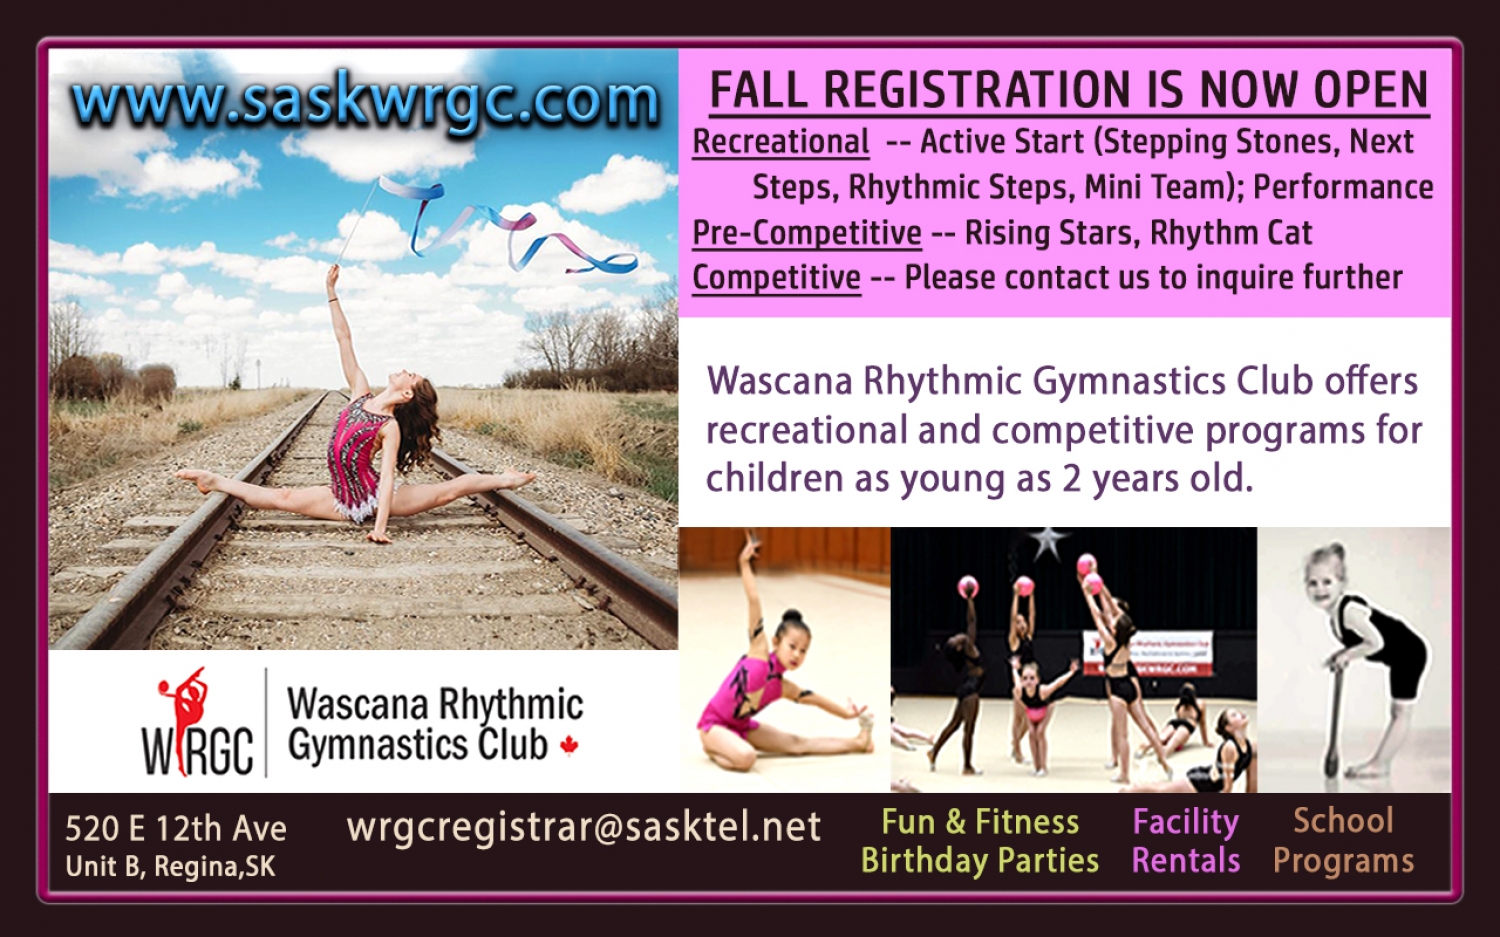 Look for our ad in the Leader Post's Fall Activity Guide